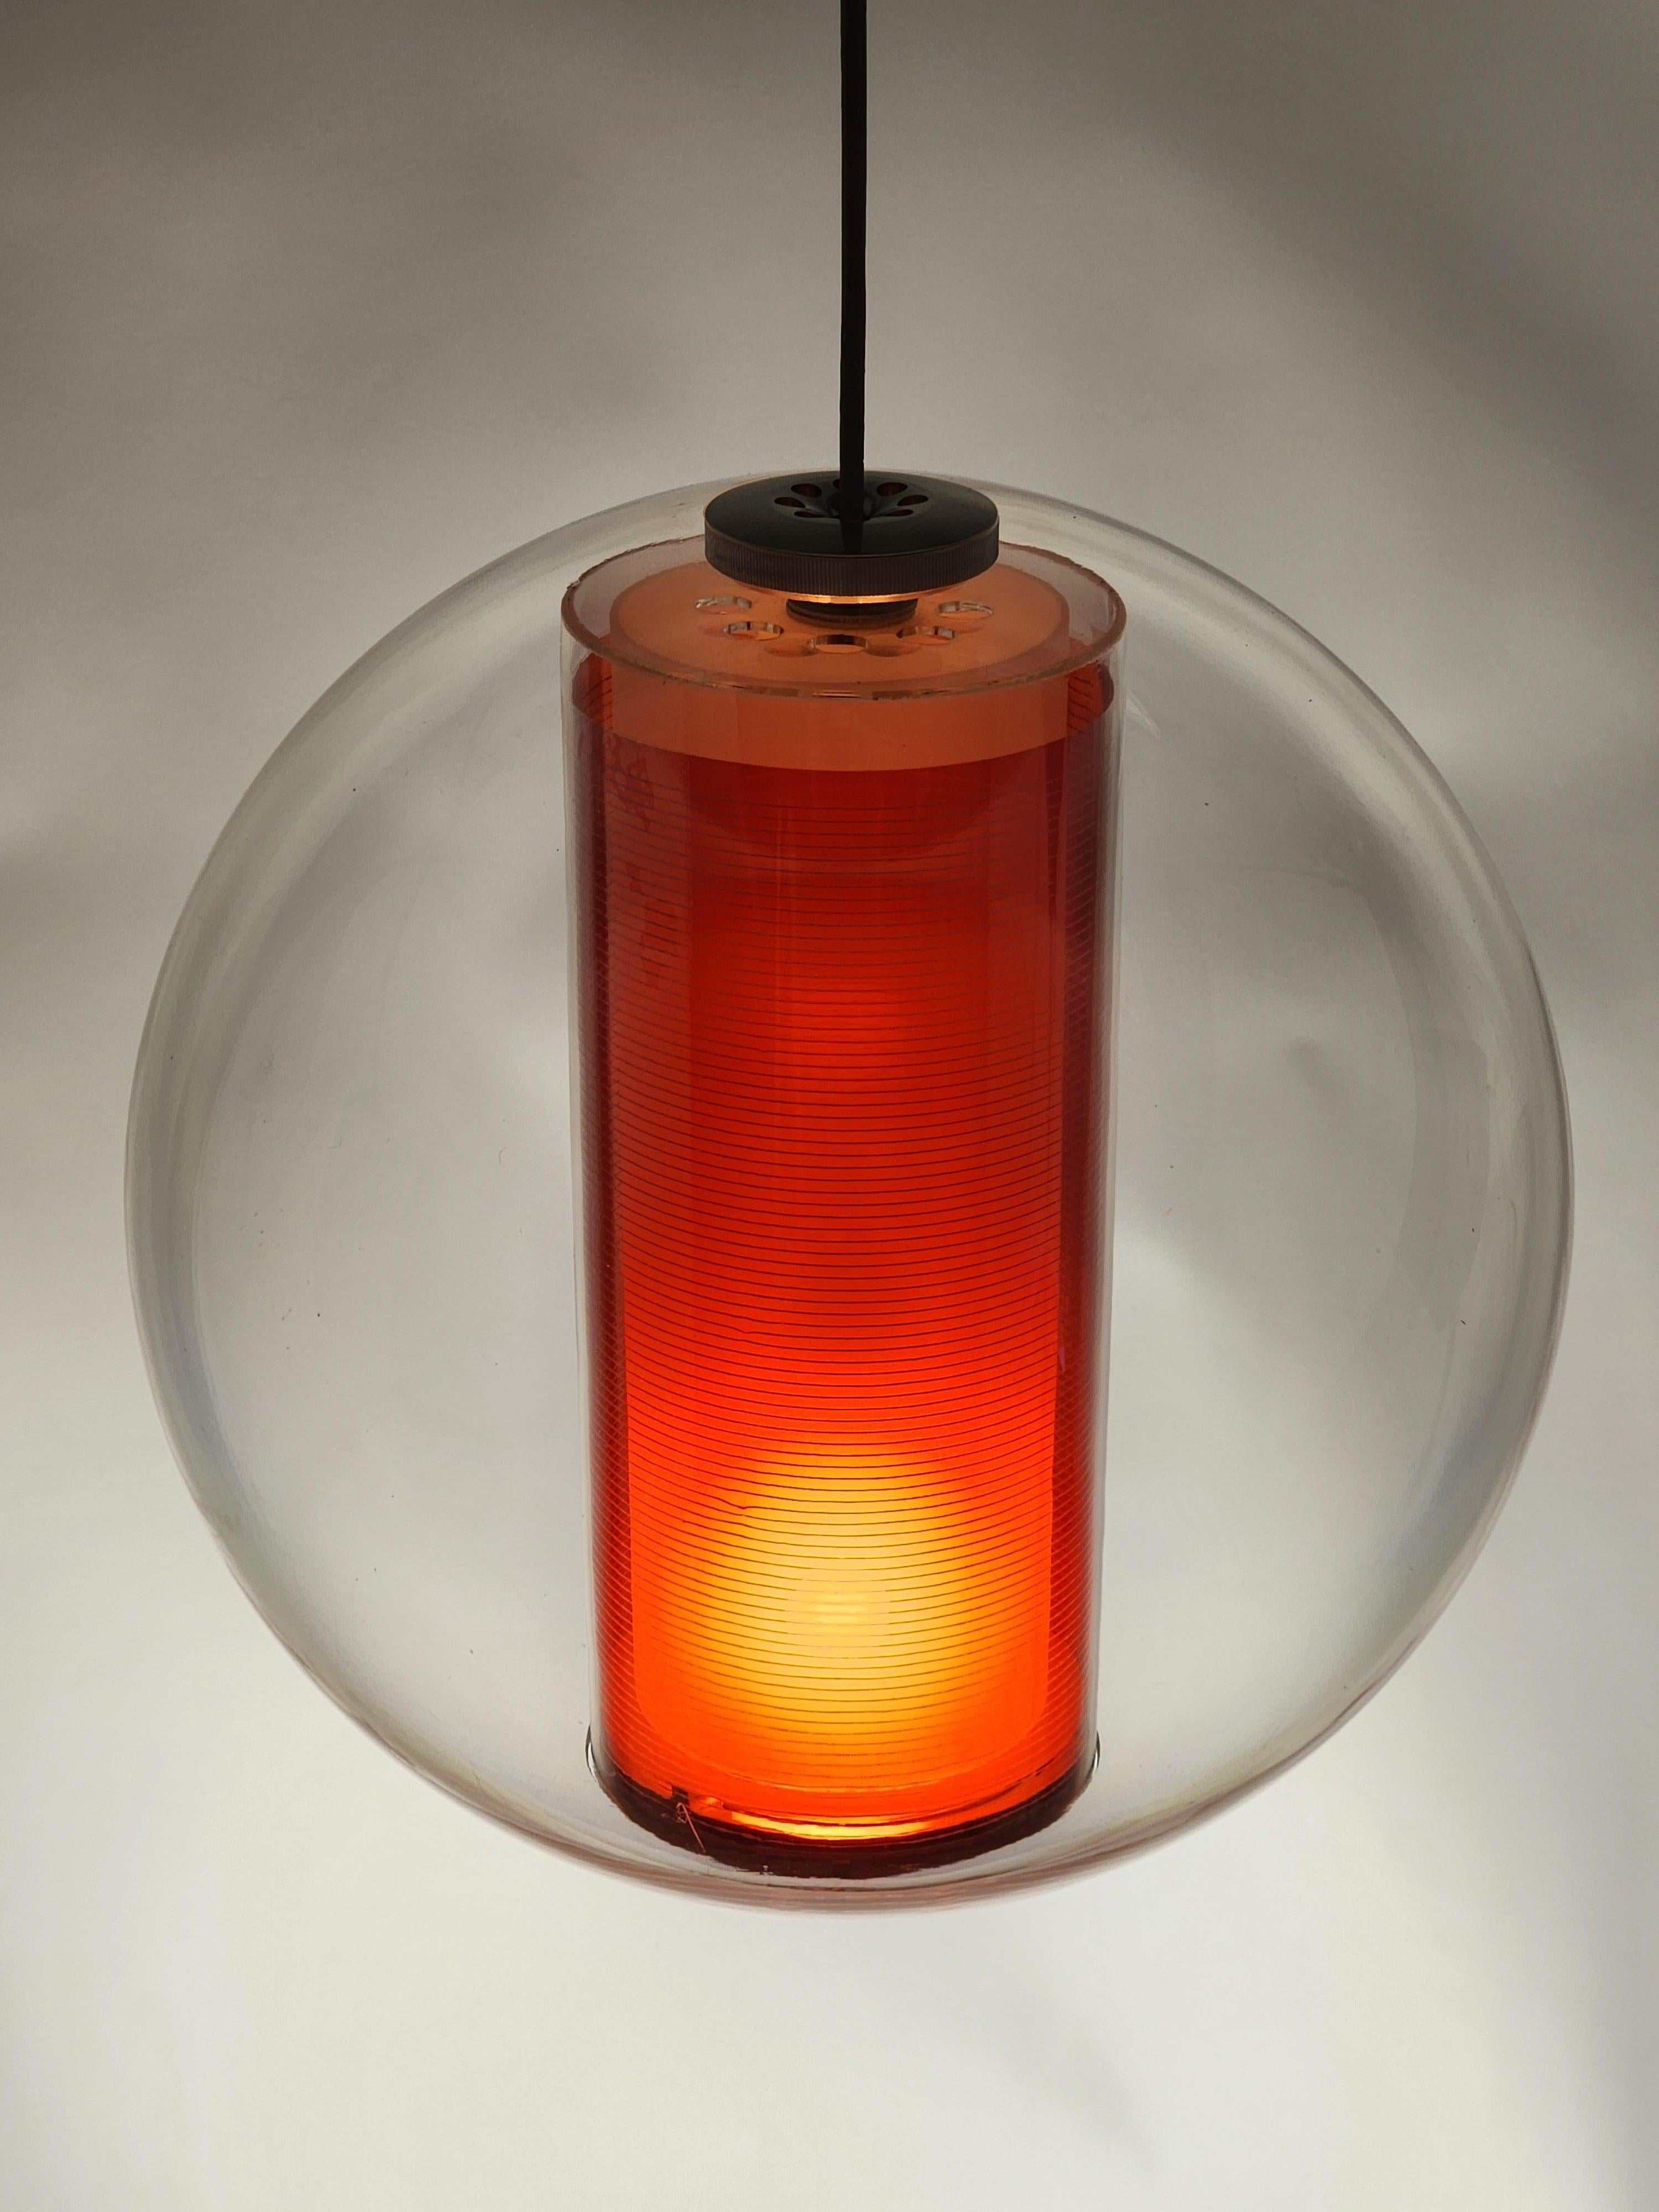 2000s Clear Acrylic Pendant with Orange Sleeve, USA For Sale 2